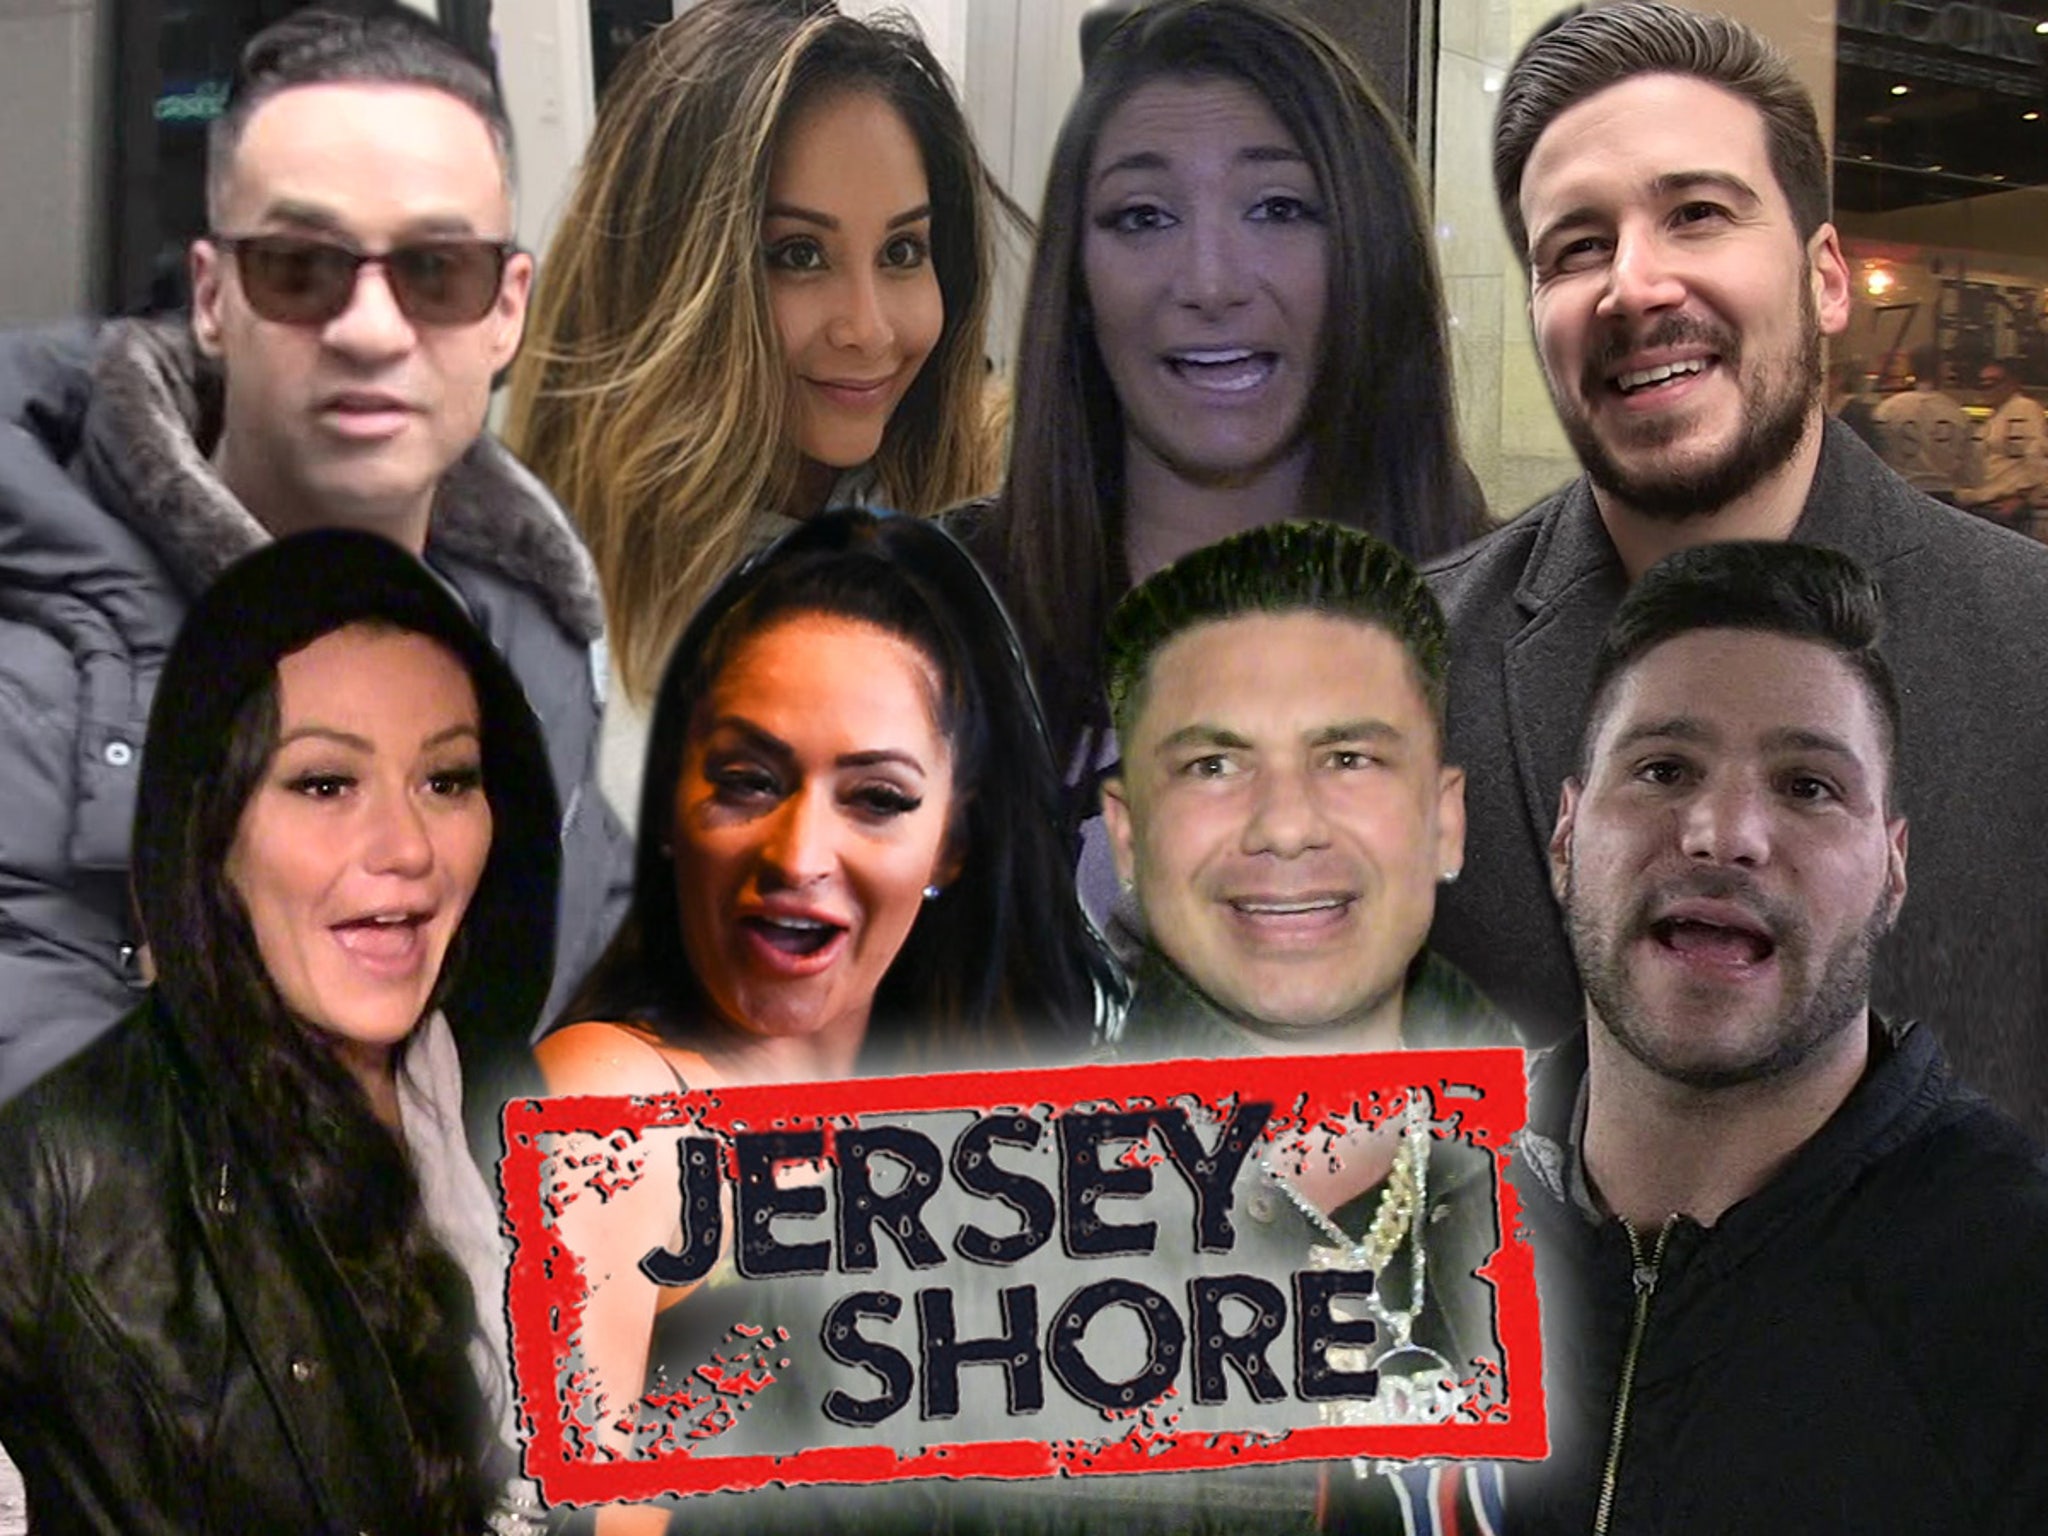 will there be another jersey shore